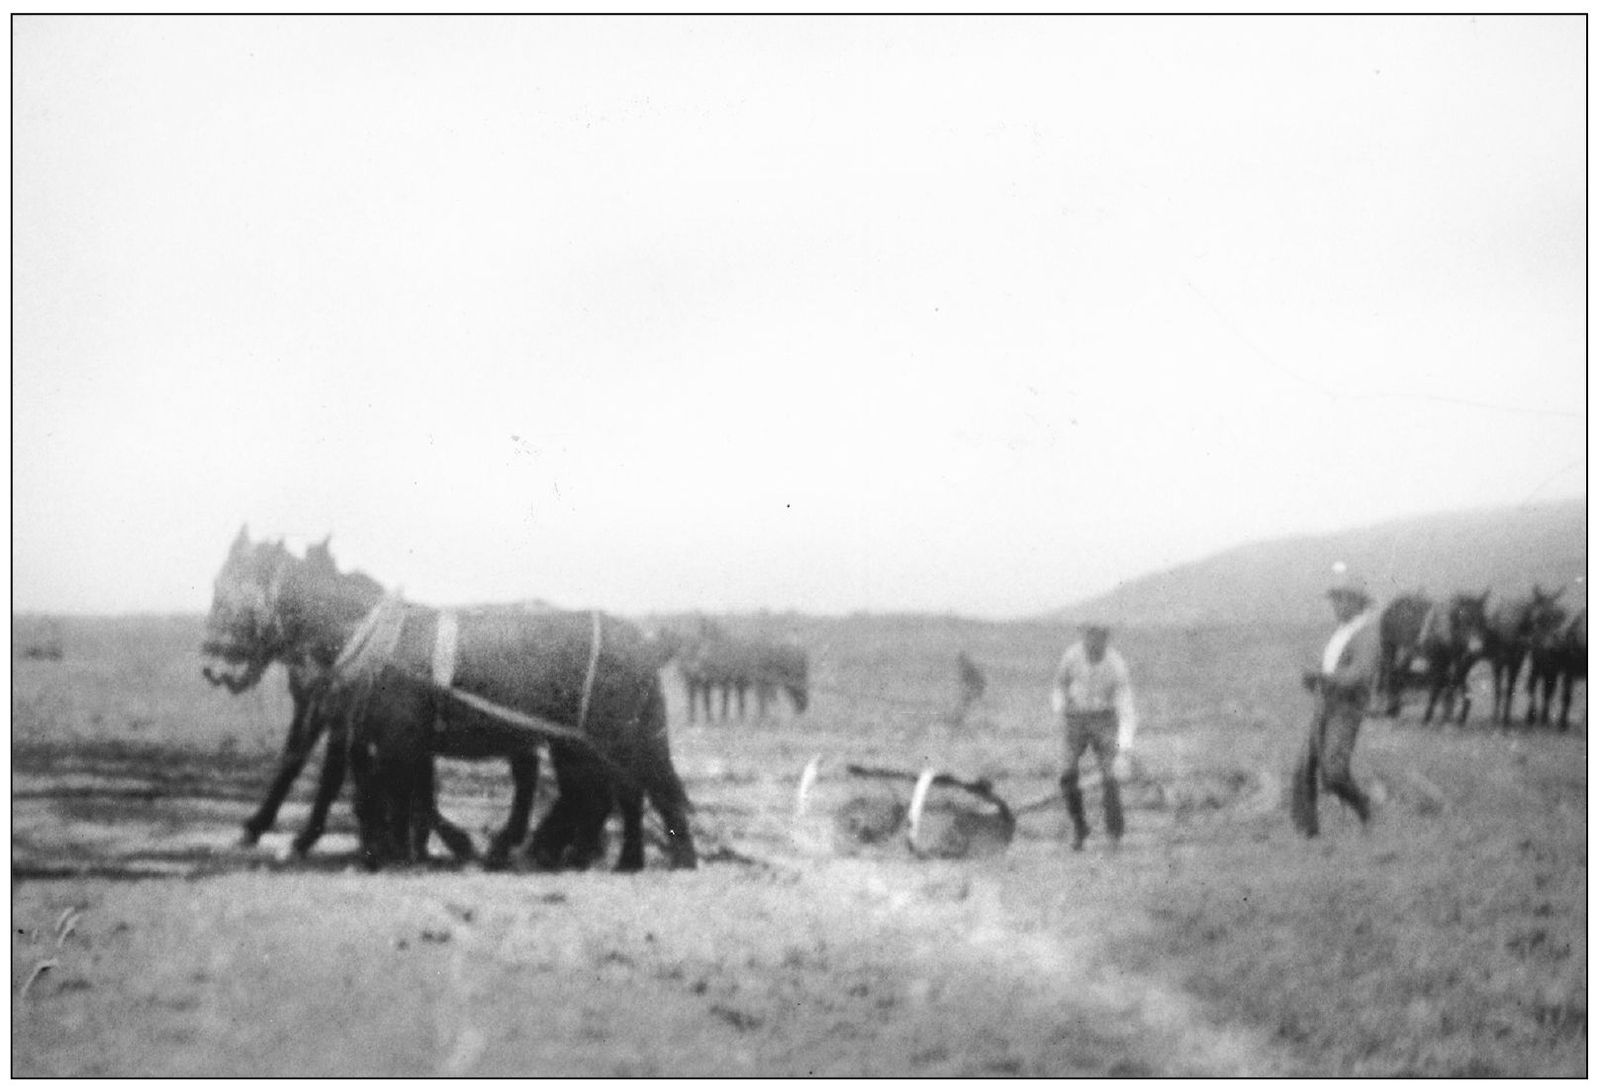 The mules are put to work on building San Clemente An 8-foot-tall wooden post - photo 8